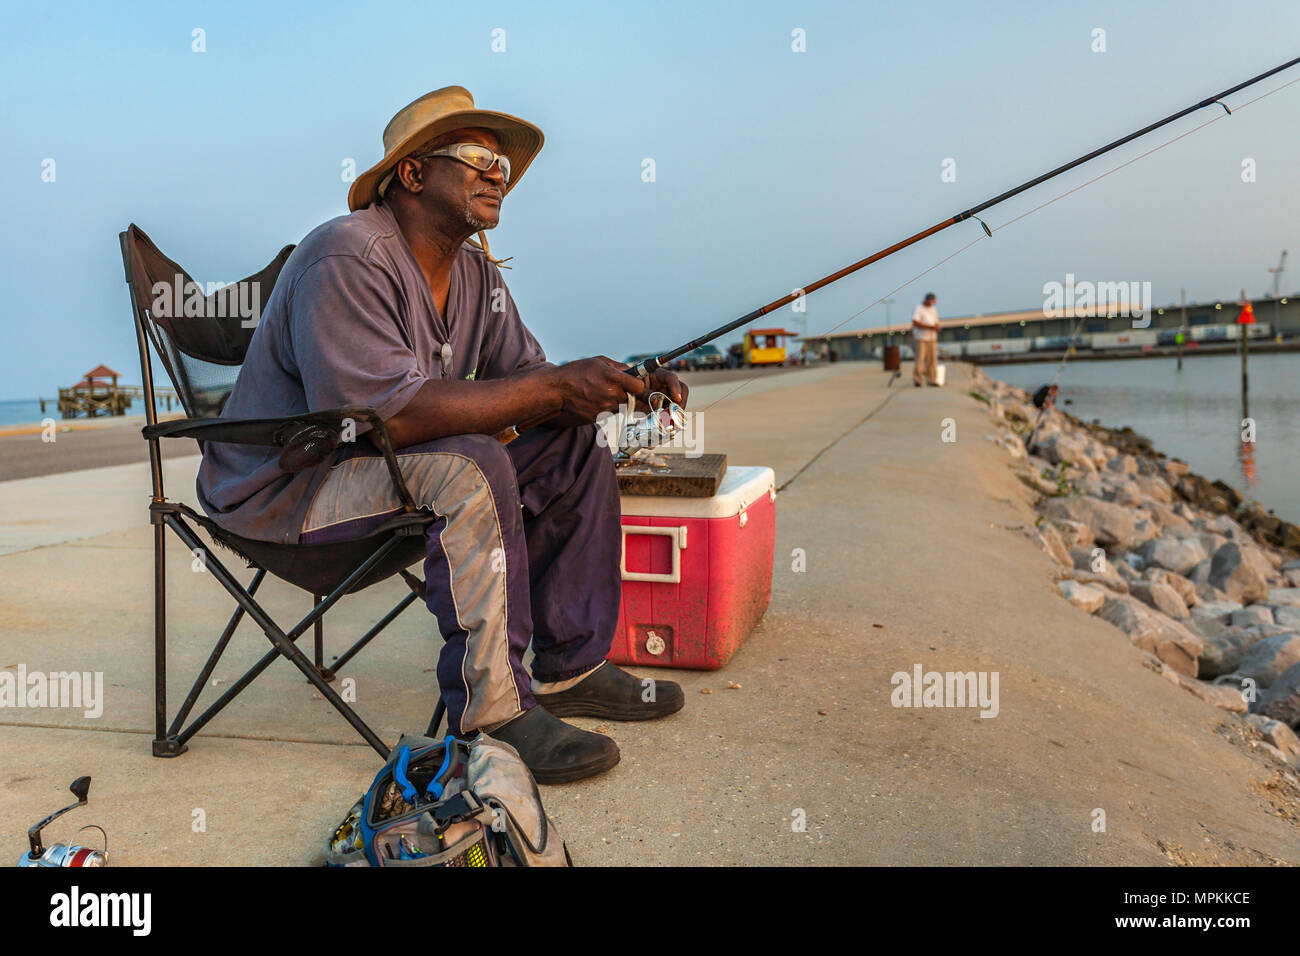 Black man with sunglasses fishing on the jetty at the Gulfport Municipal Marina in Gulfport, Mississippi Stock Photo